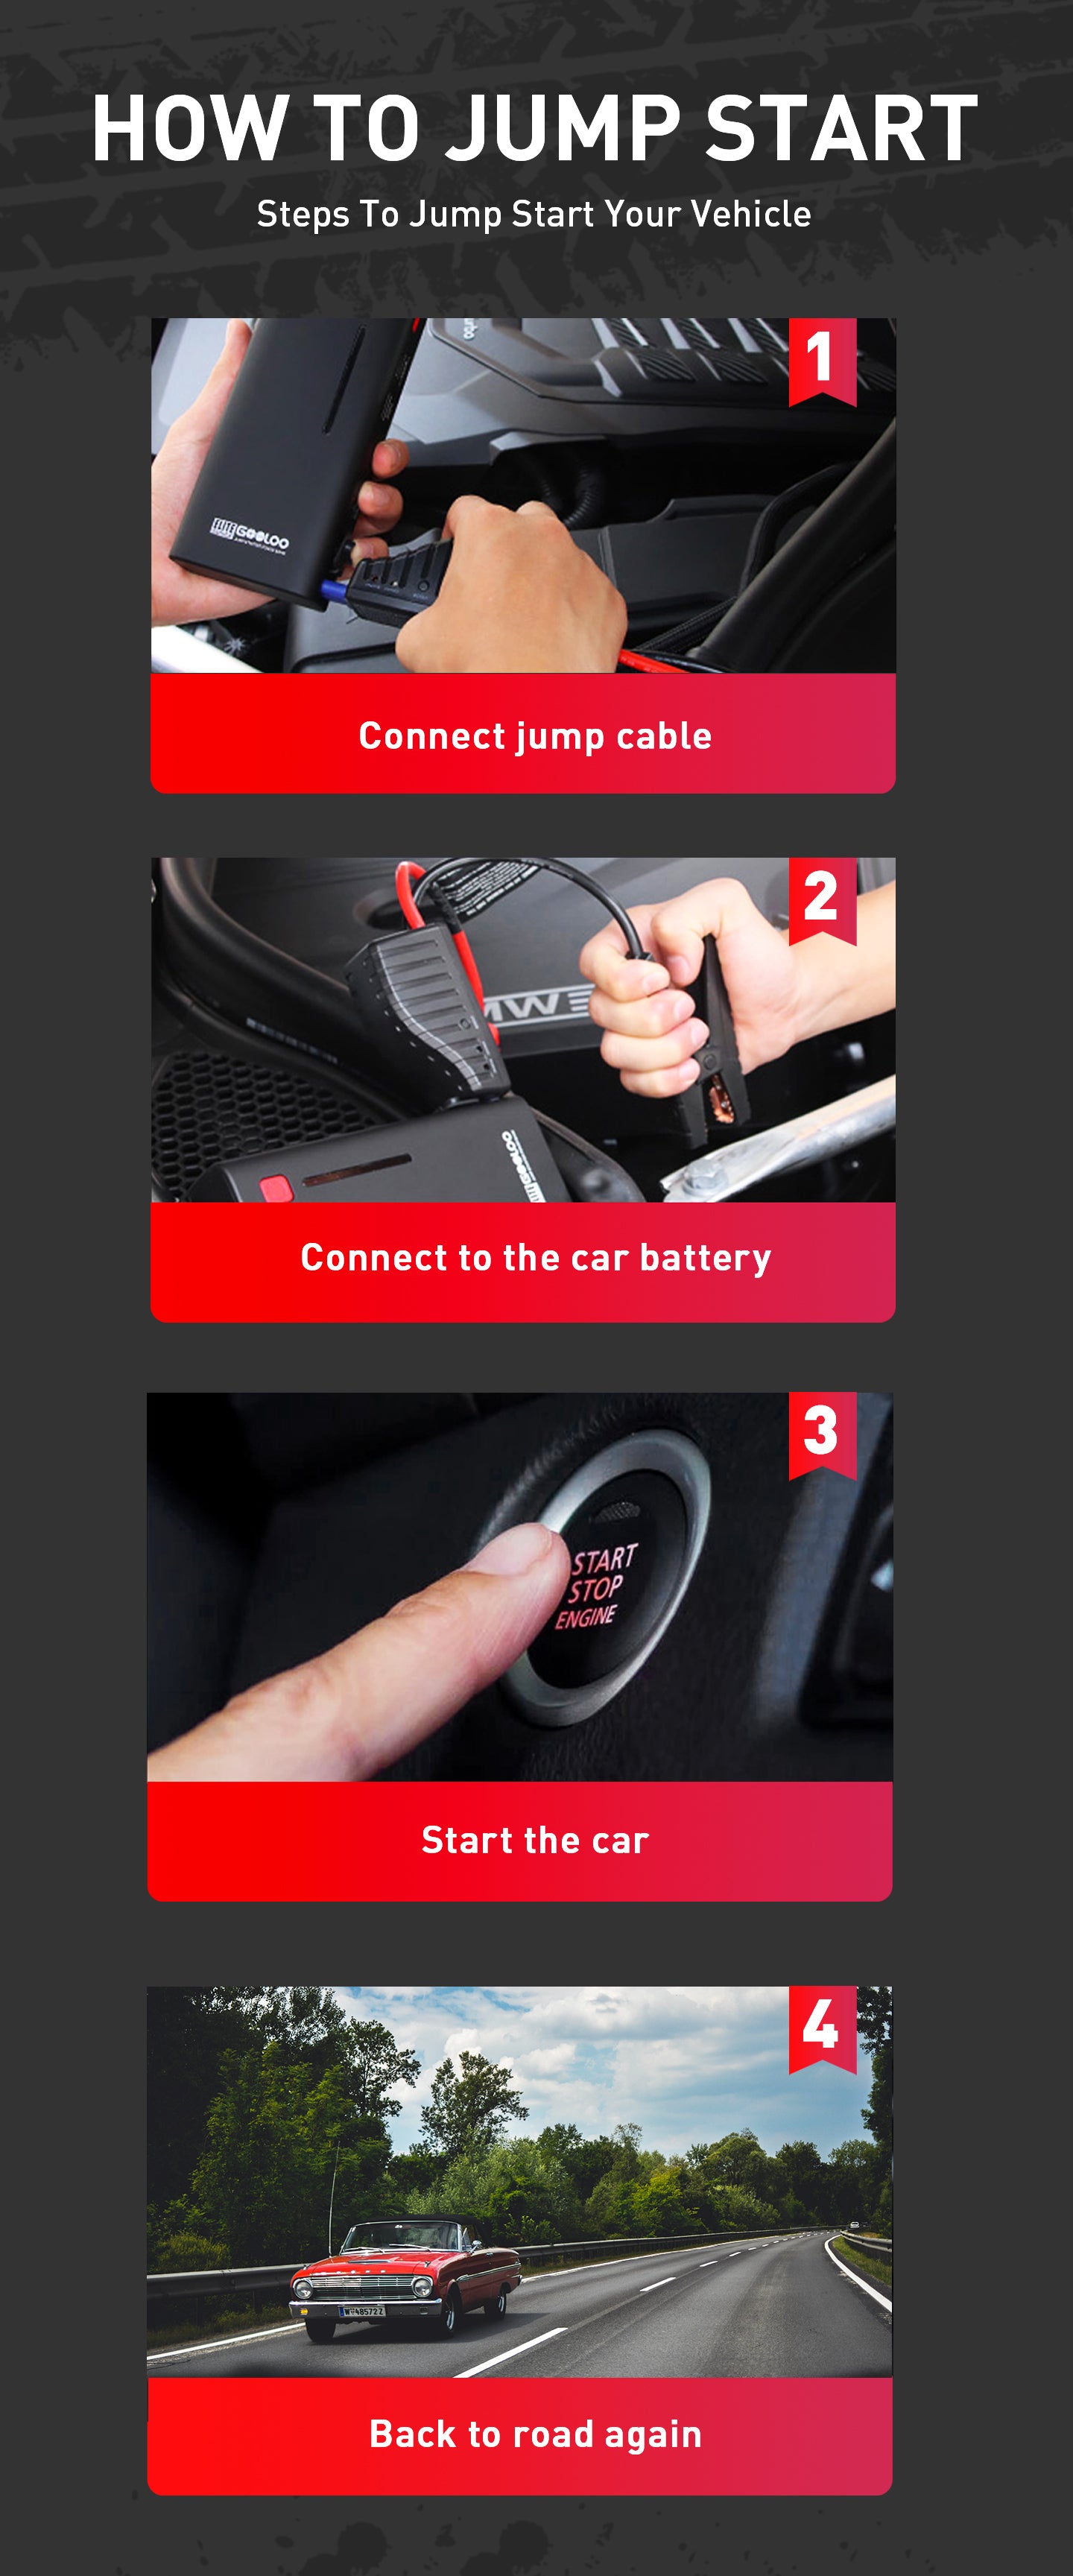 Steps to jump-start vehicle connect to car battery back to road again